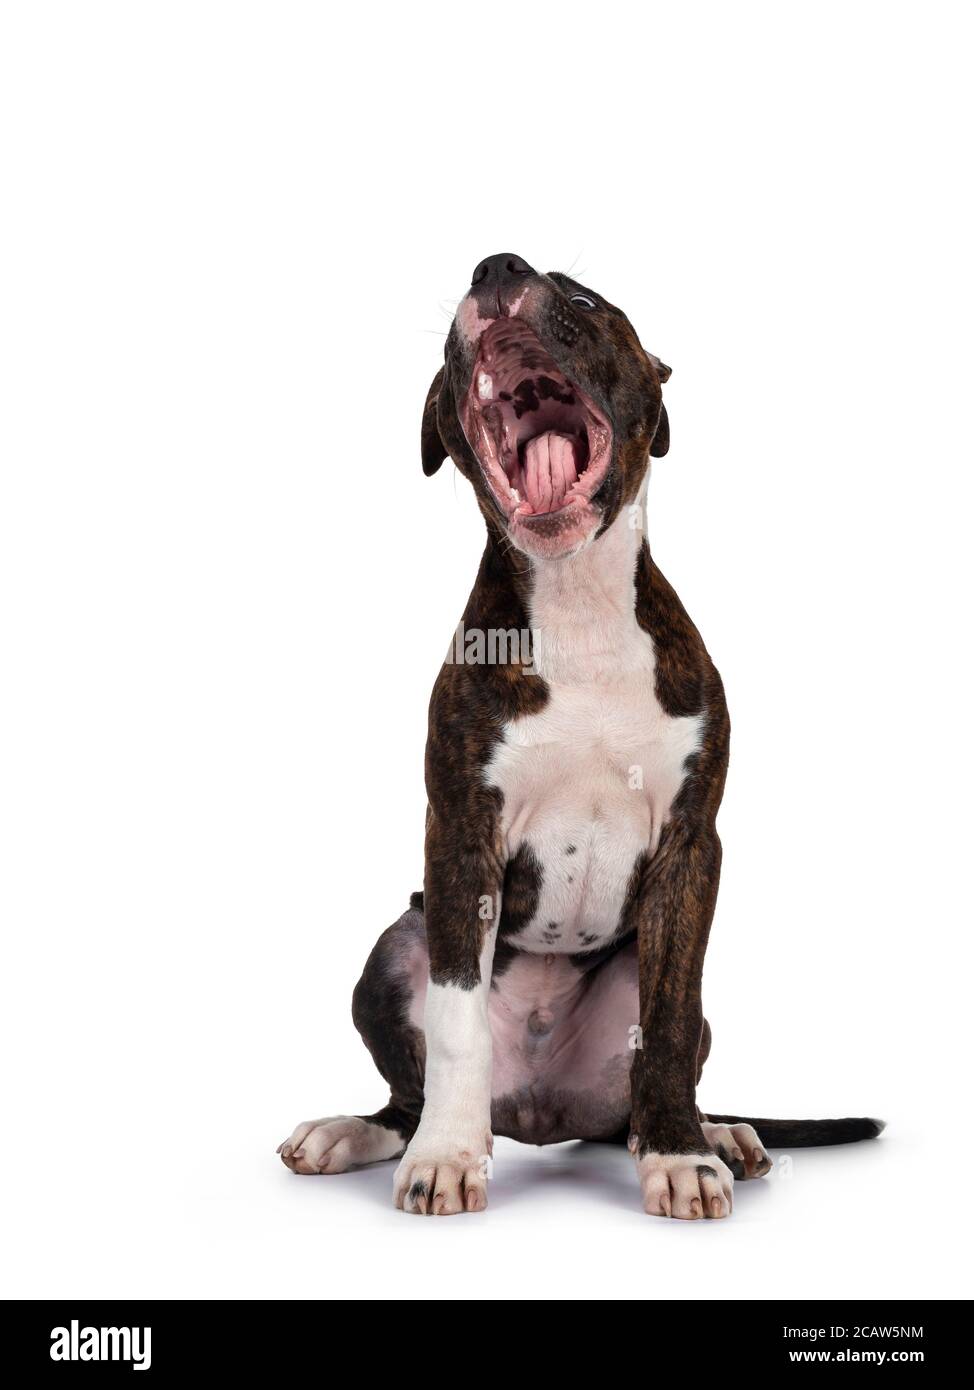 Young brindle with white American Staffordshire Terrier dog, sitting up facing front with mouth wide open. Isolated on white background. Stock Photo